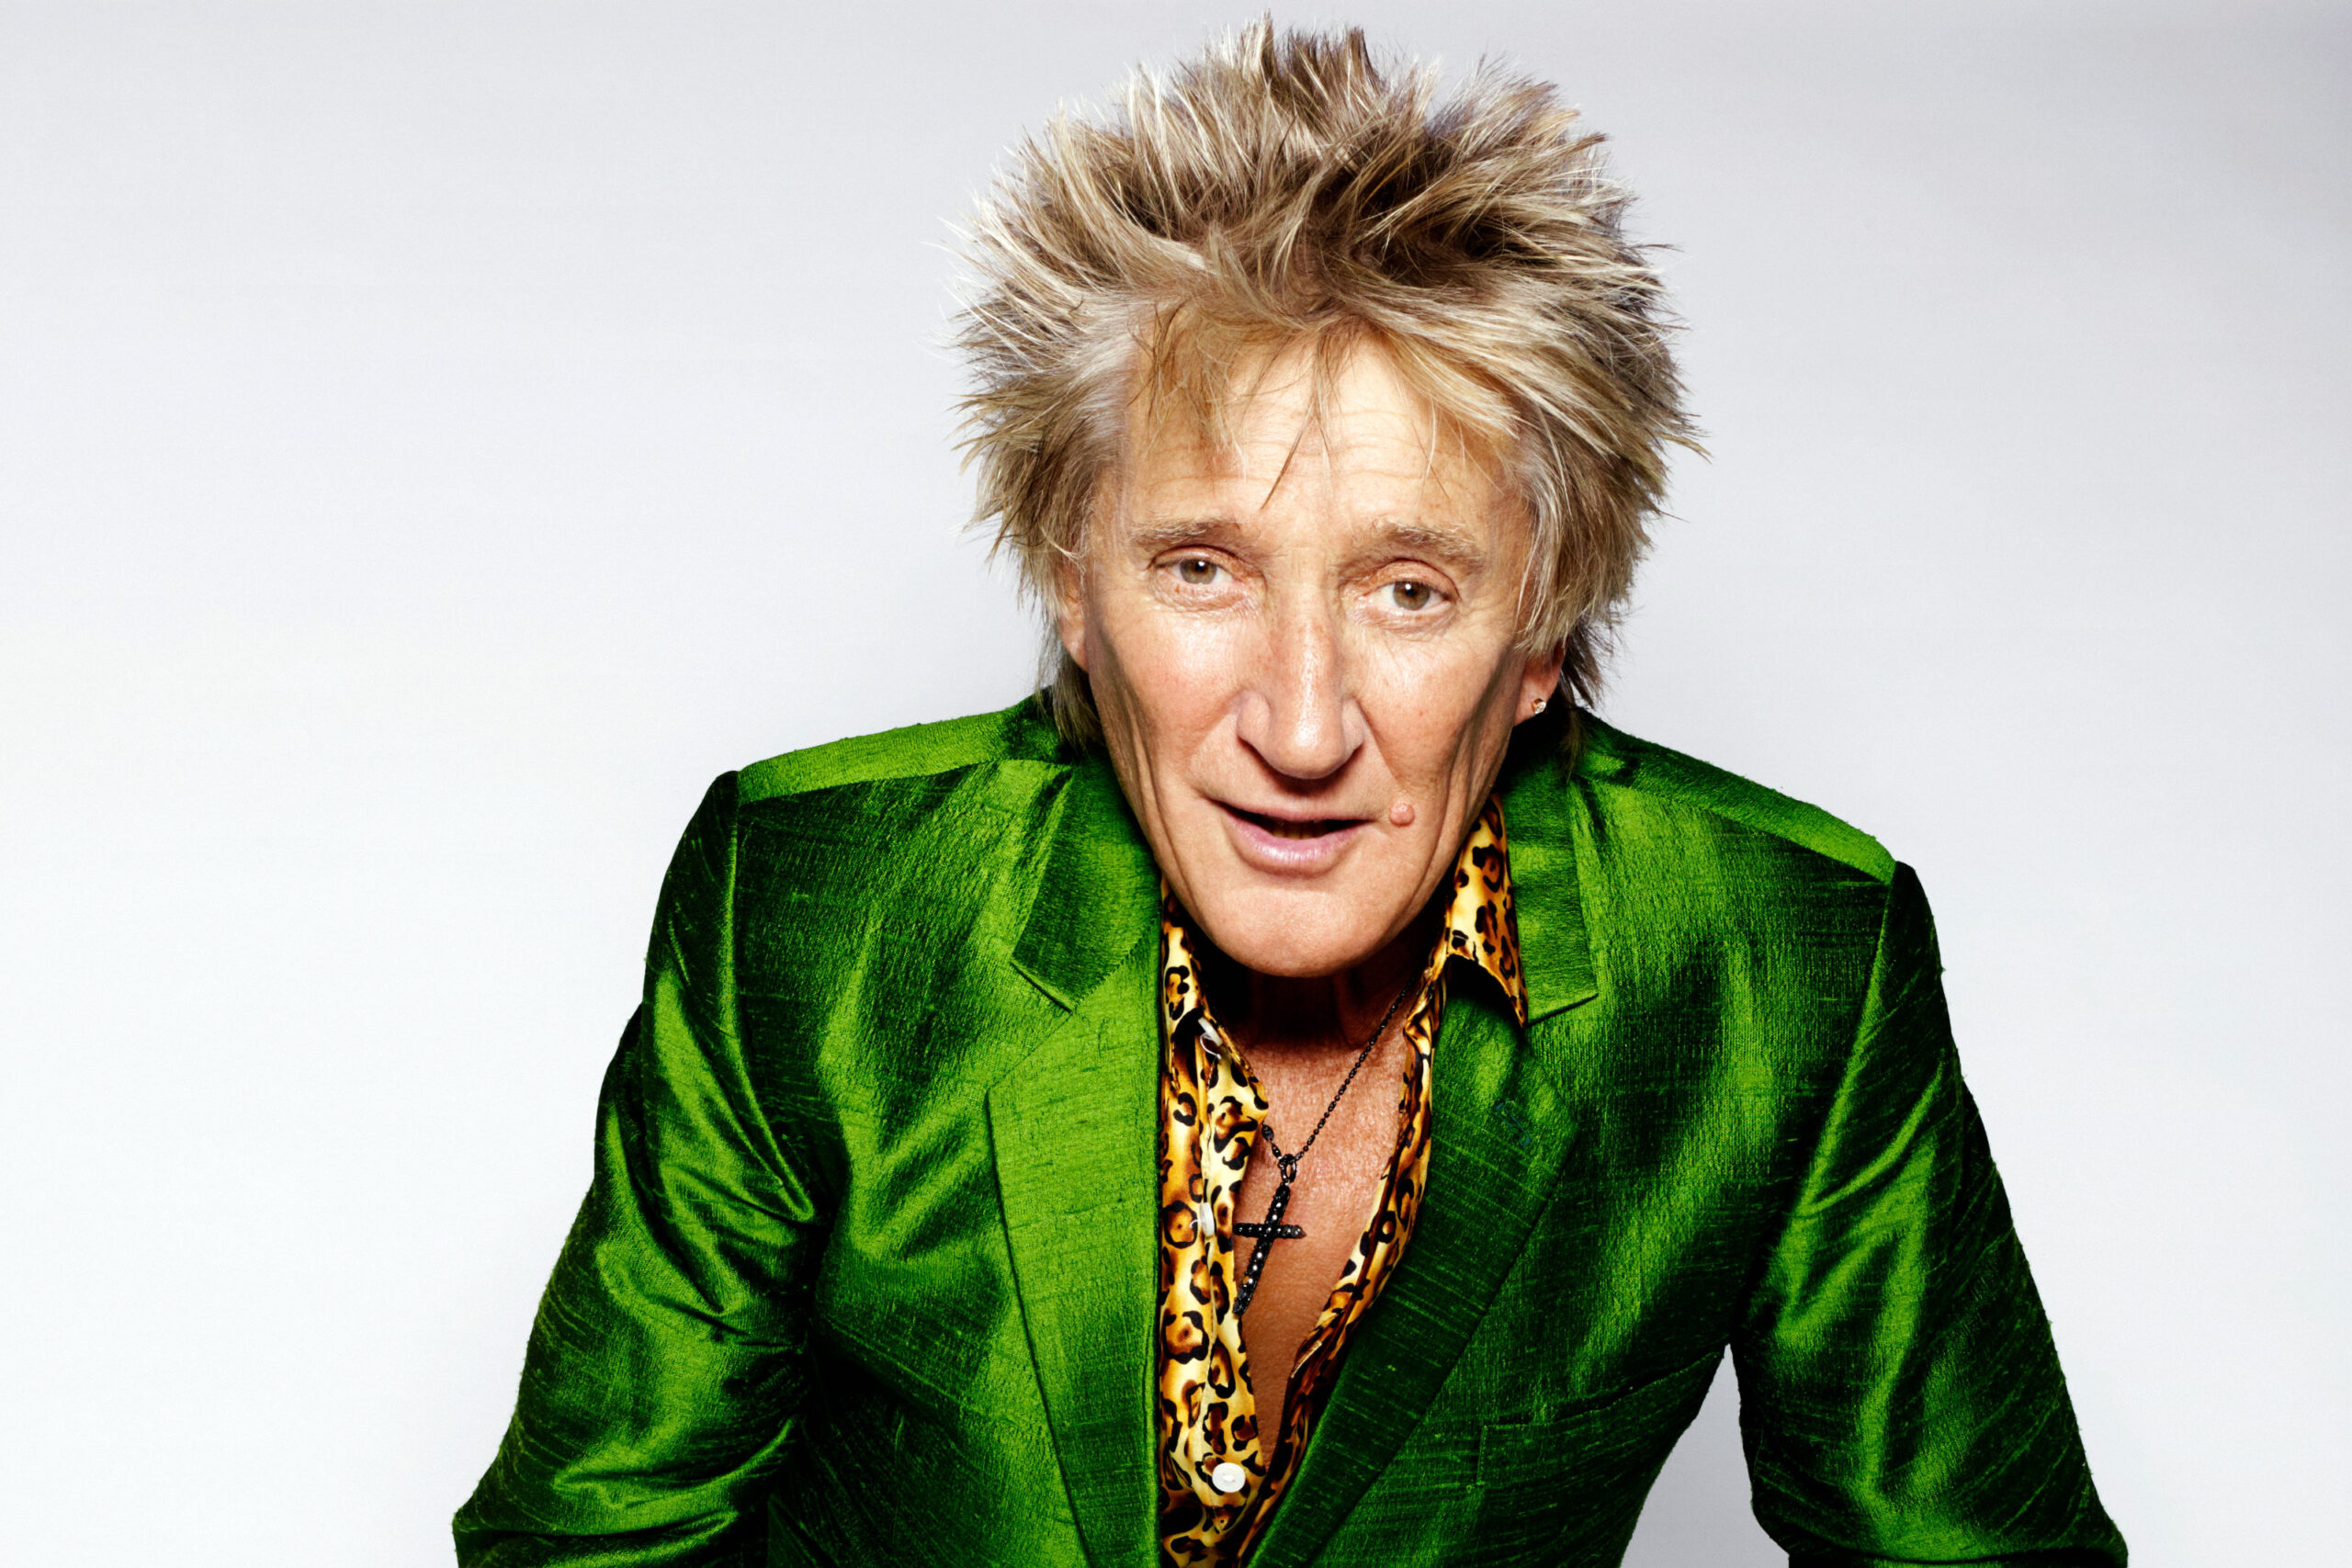 Singer Rod Stewart’s New Album Is Dedicated To Love And Sex With Wife Penny